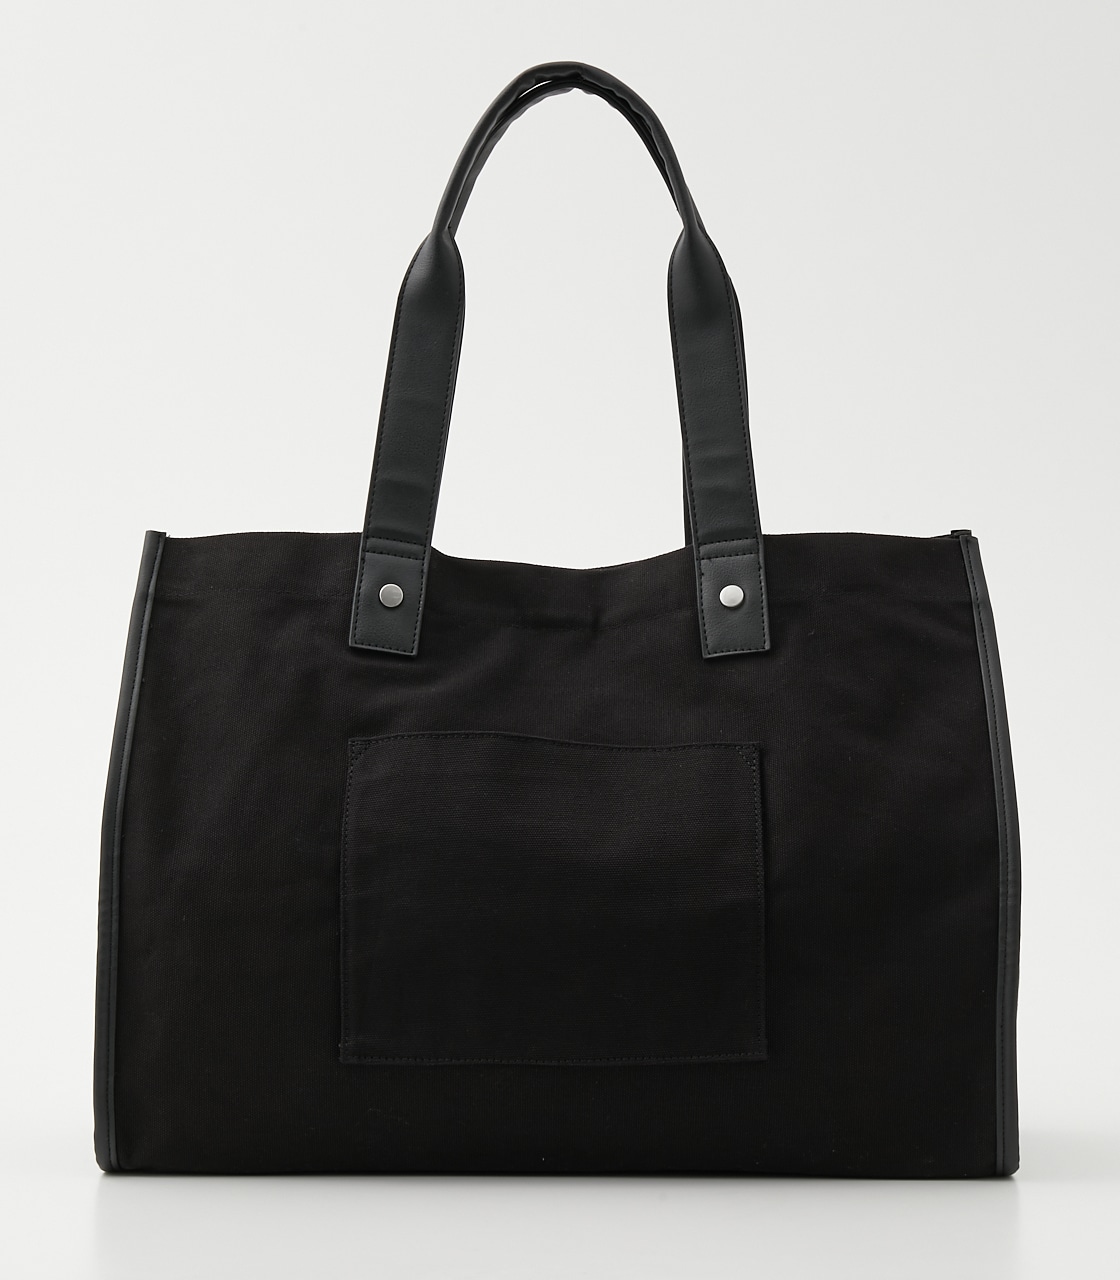 LINEN LIKE BIG TOTE BAG/リネンライクビッグトートバッグ